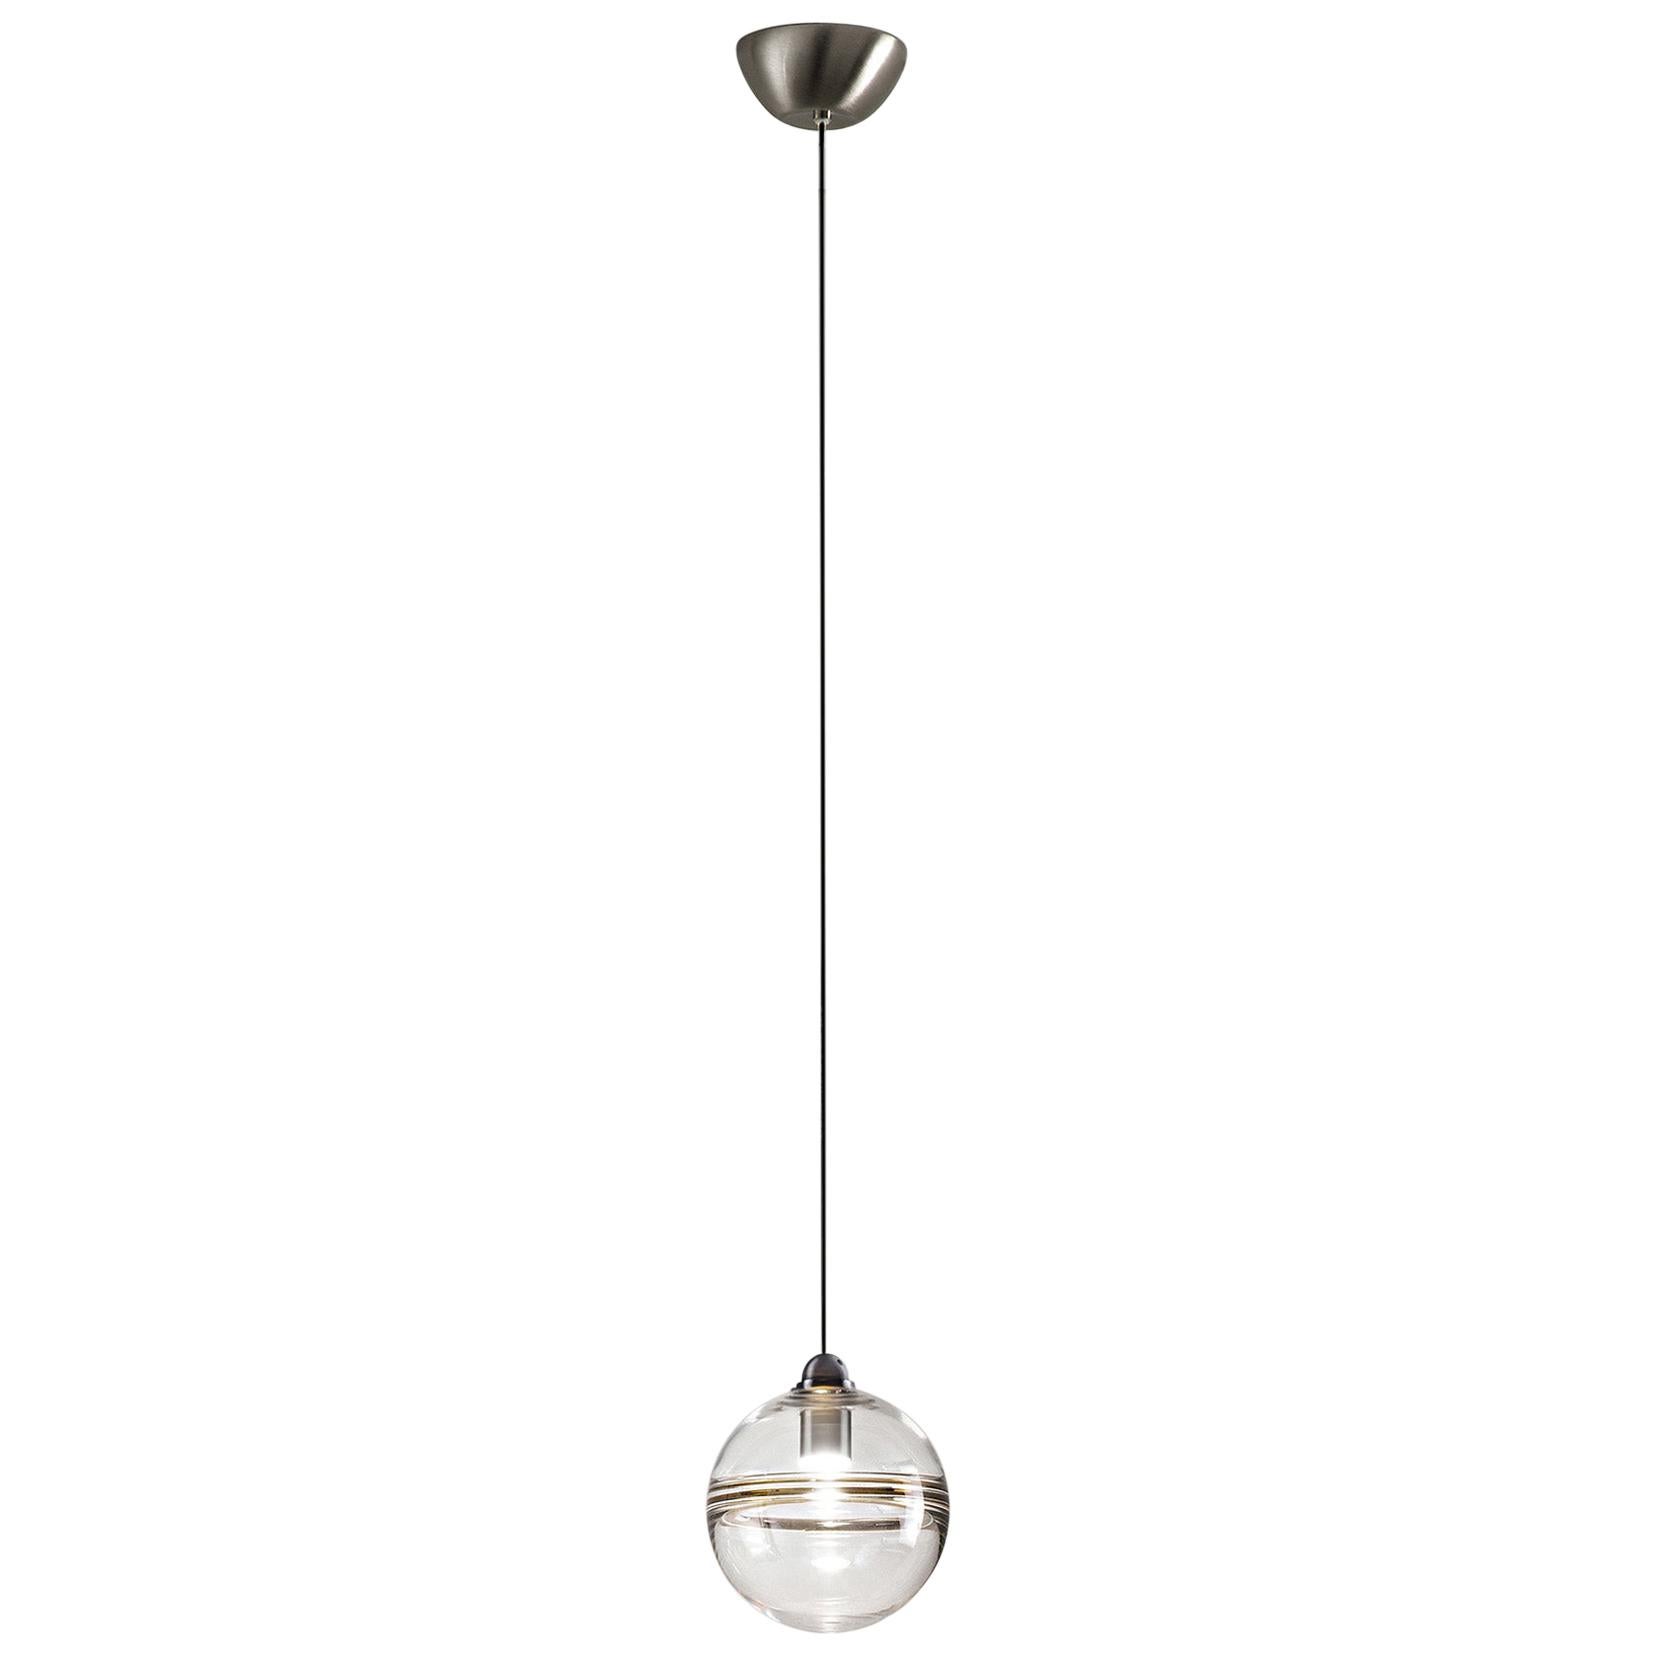 Green (Crystal and Old Green) LED Oro SP P Suspension Light with Nickel Frame by Vistosi